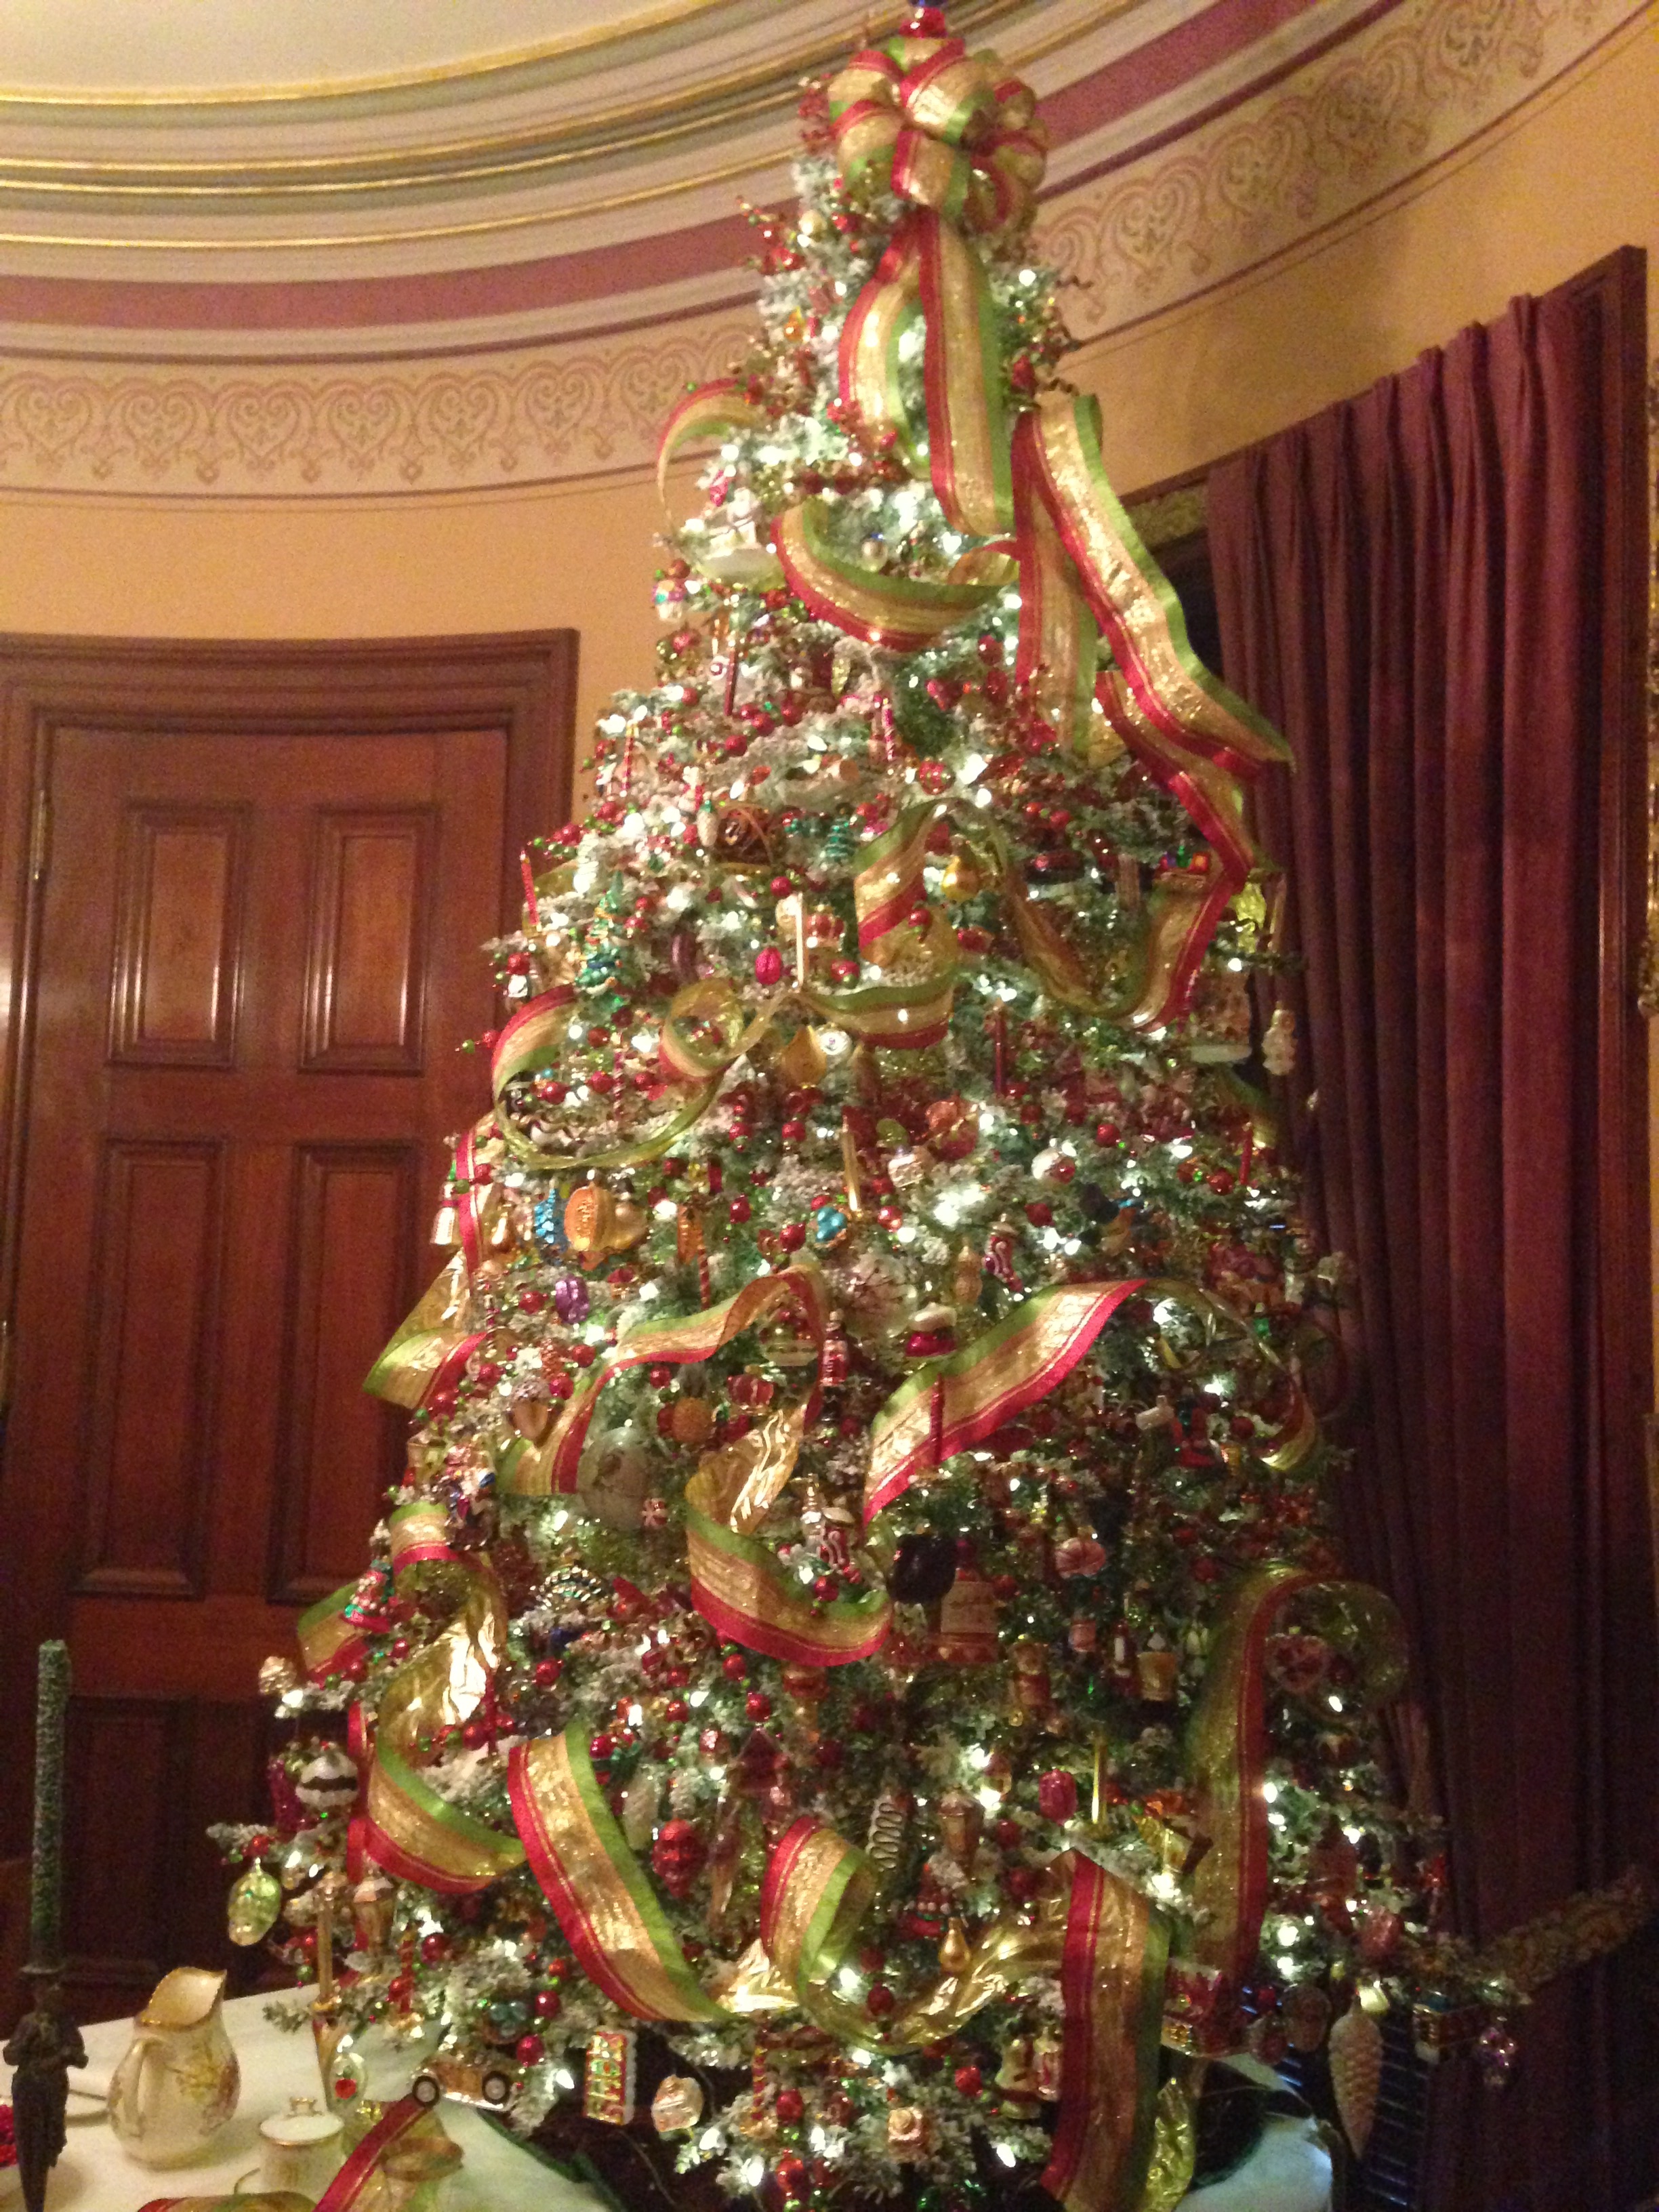 Beautiful tree in the dining room